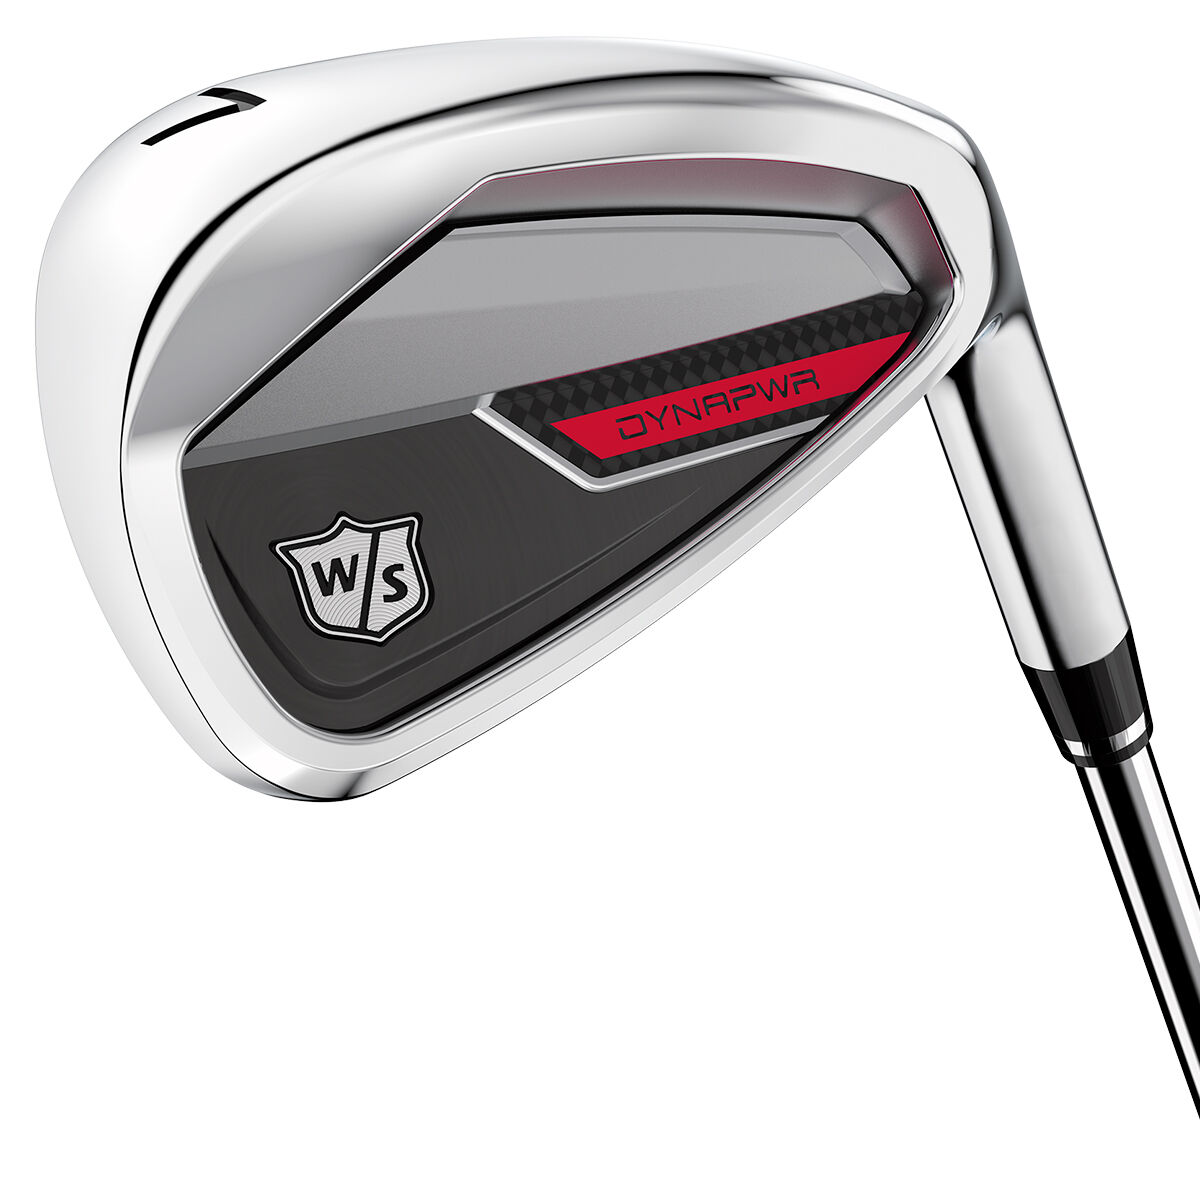 Wilson Staff Grey and Red Dynapower Steel Uniflex Left Hand 6 Golf Irons, Size: 5-Pw | American Golf